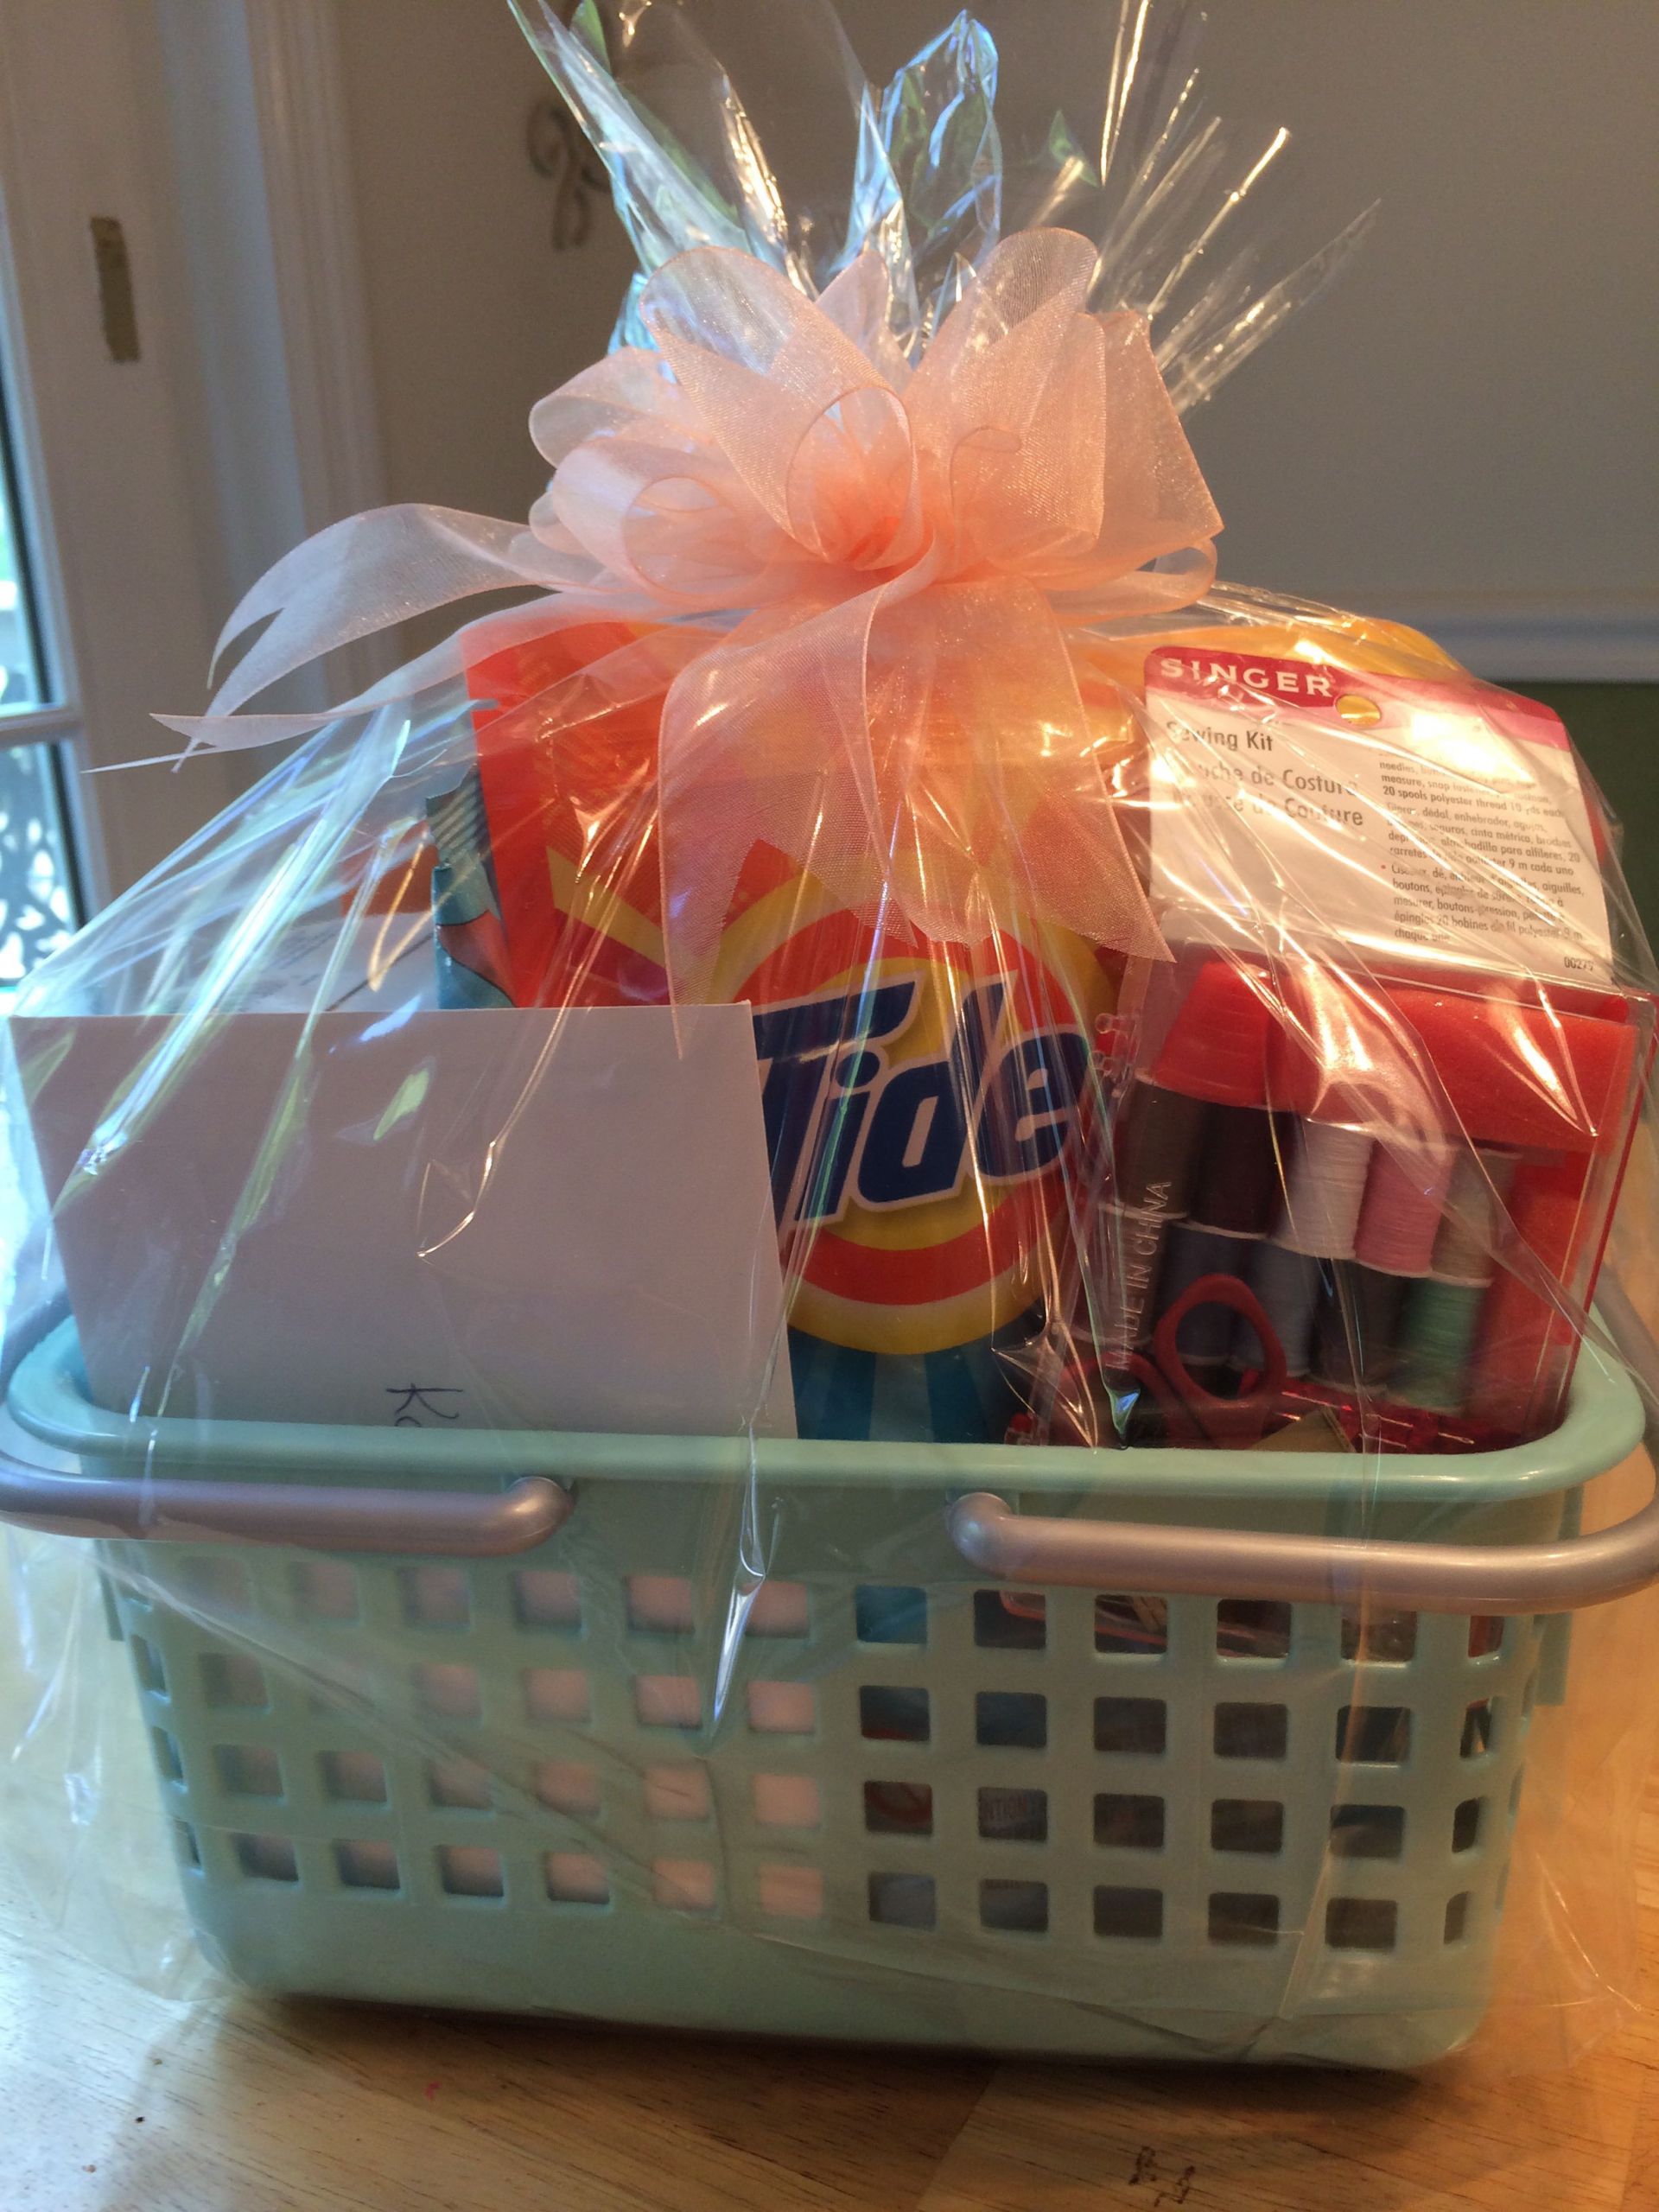 Off To College Gift Basket Ideas
 Going off to college t Just a few items and a cute